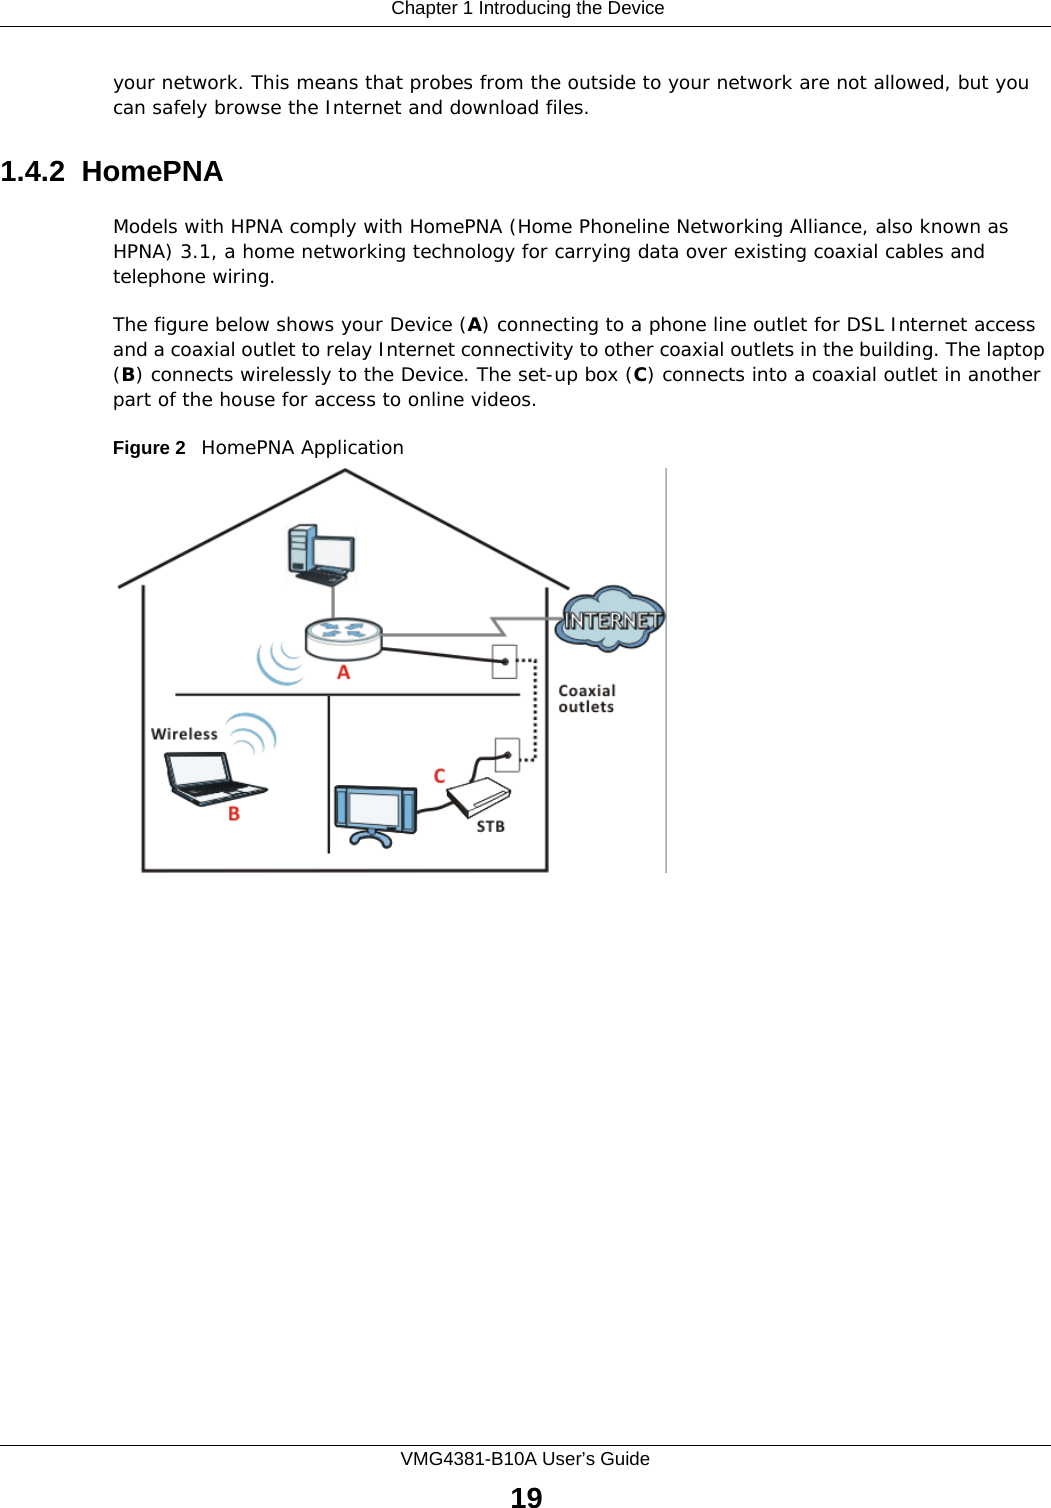  Chapter 1 Introducing the DeviceVMG4381-B10A User’s Guide19your network. This means that probes from the outside to your network are not allowed, but you can safely browse the Internet and download files.1.4.2  HomePNAModels with HPNA comply with HomePNA (Home Phoneline Networking Alliance, also known as HPNA) 3.1, a home networking technology for carrying data over existing coaxial cables and telephone wiring.The figure below shows your Device (A) connecting to a phone line outlet for DSL Internet access and a coaxial outlet to relay Internet connectivity to other coaxial outlets in the building. The laptop (B) connects wirelessly to the Device. The set-up box (C) connects into a coaxial outlet in another part of the house for access to online videos.Figure 2   HomePNA Application 